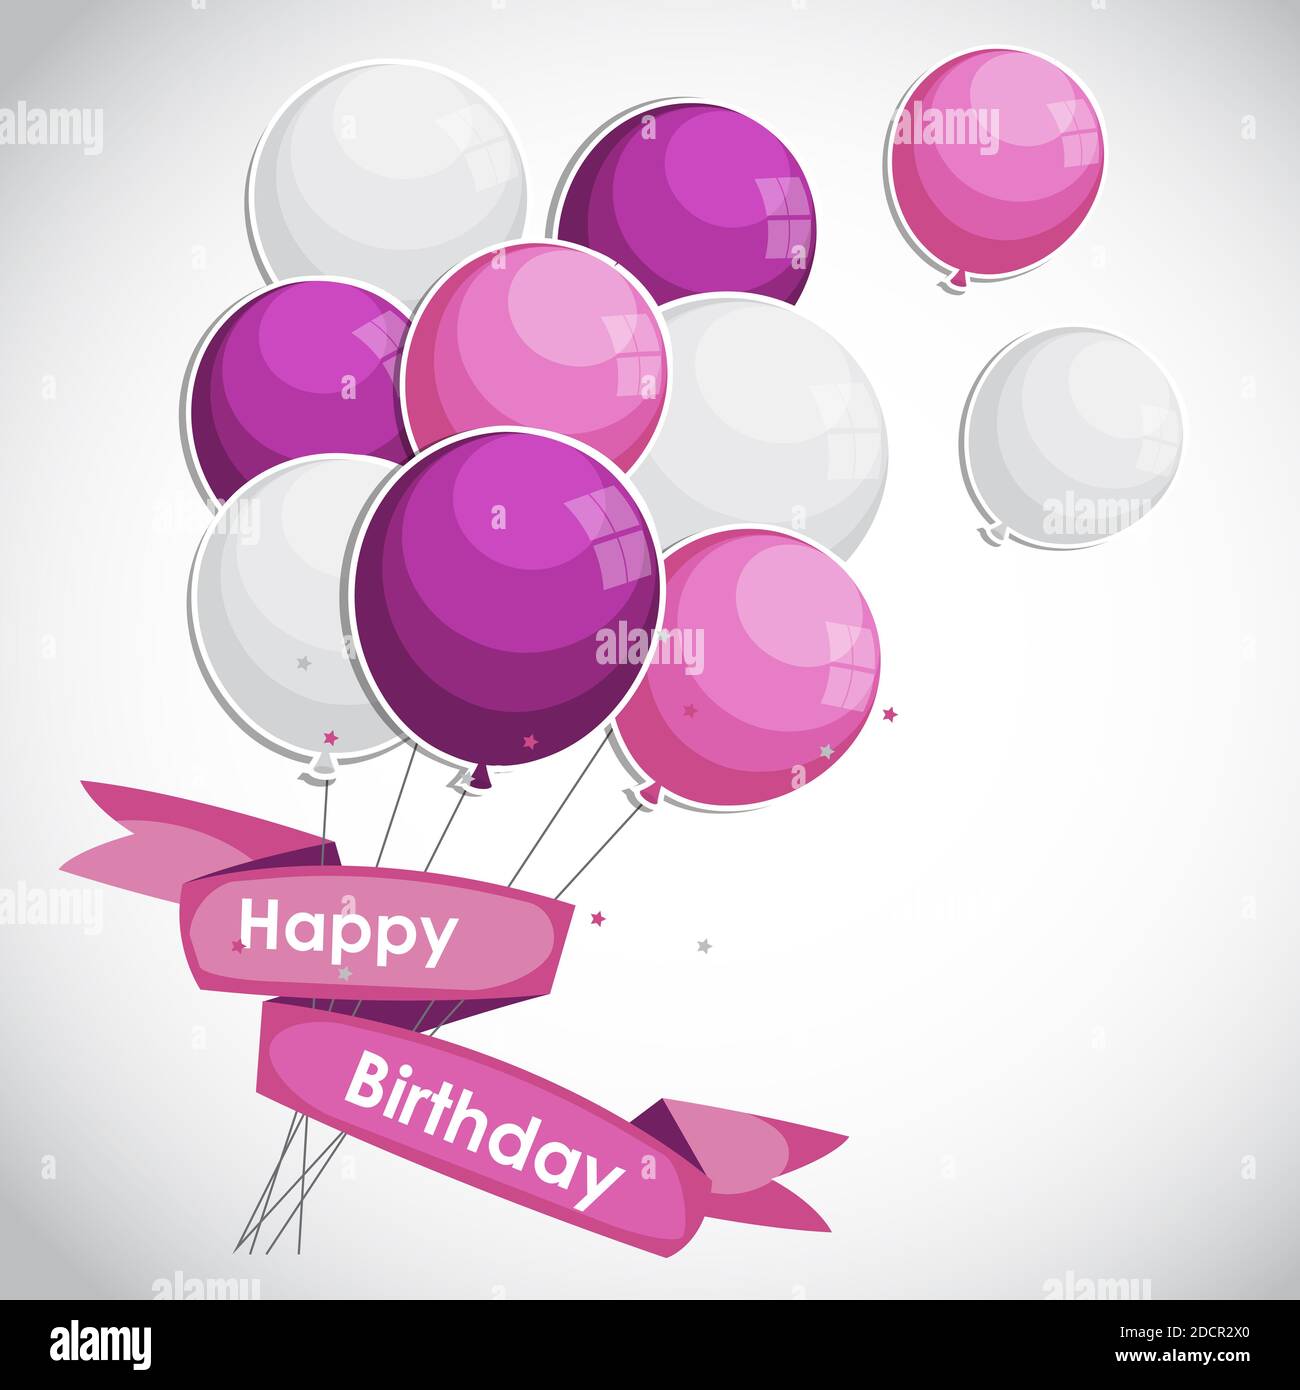 Color Glossy Happy Birthday Balloons Banner Background Illustration ...